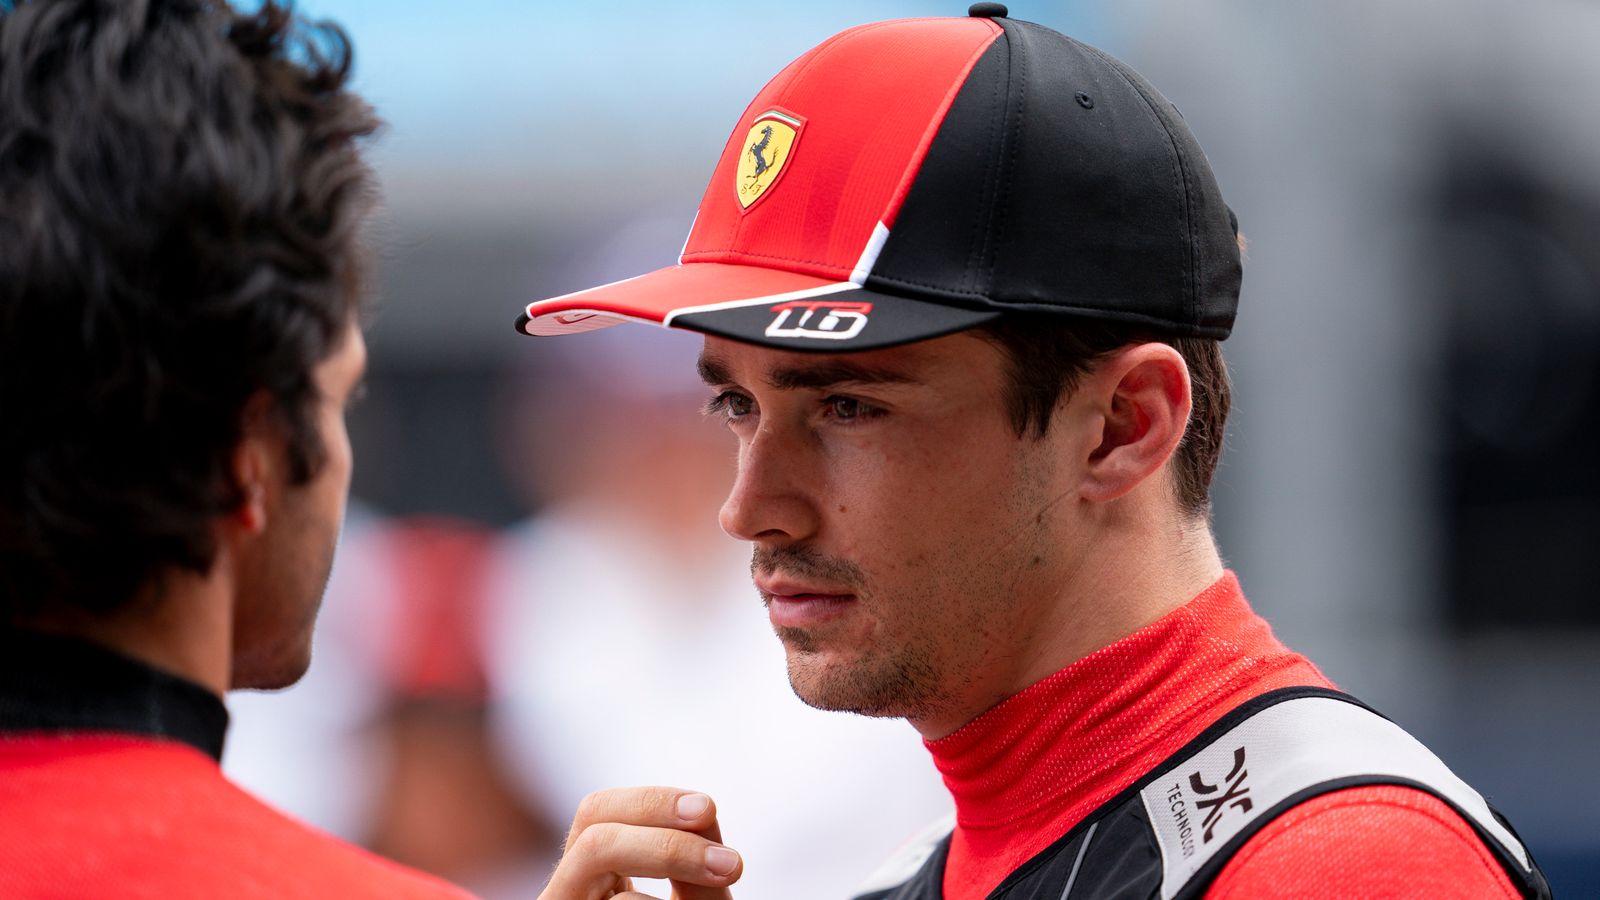 Charles Leclerc to start the 2023 Spanish Grand Prix from pit lane 